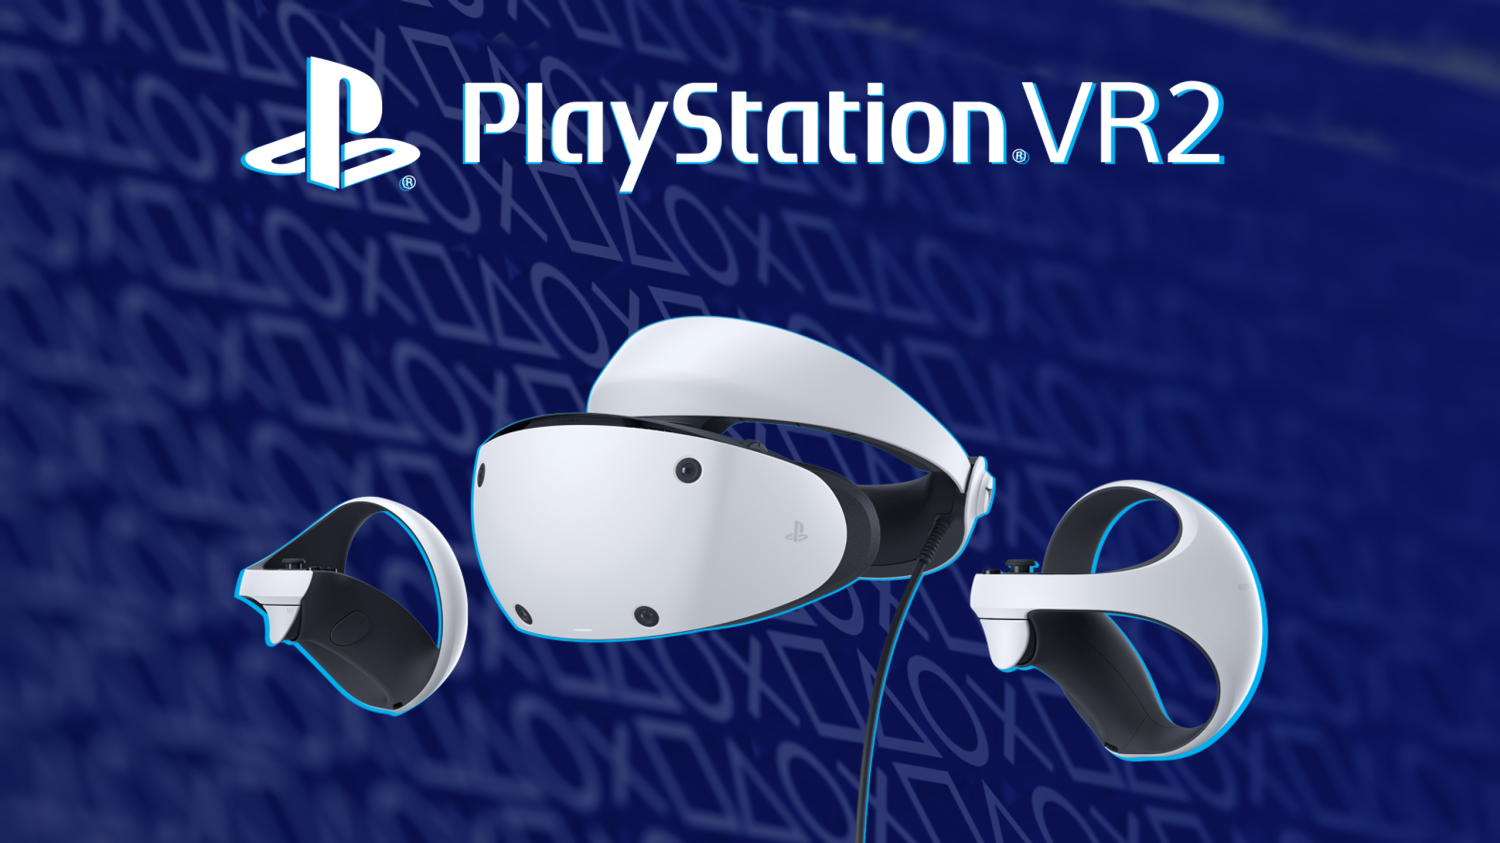 What Games Are Compatible with PSVR 2?